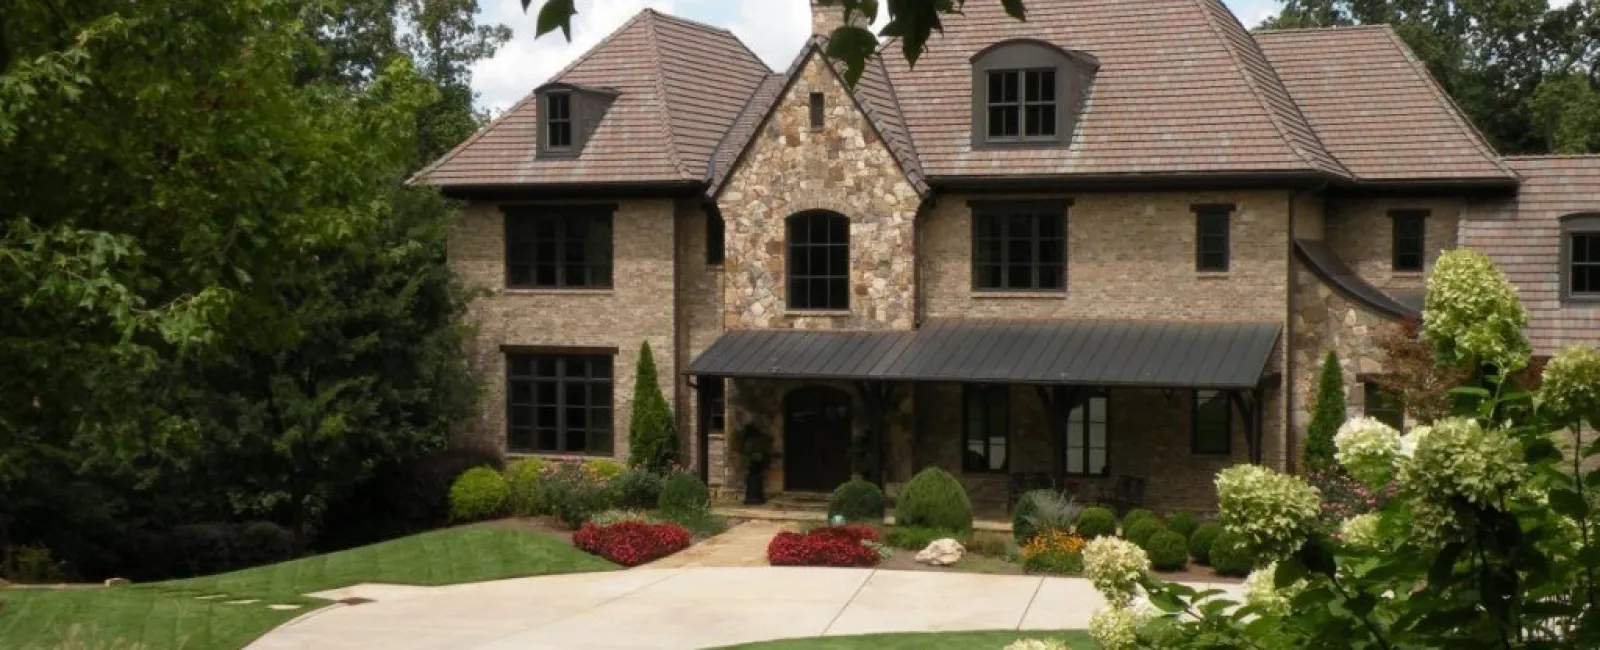 5 Tips to Complement Your Homes Exterior With Landscaping